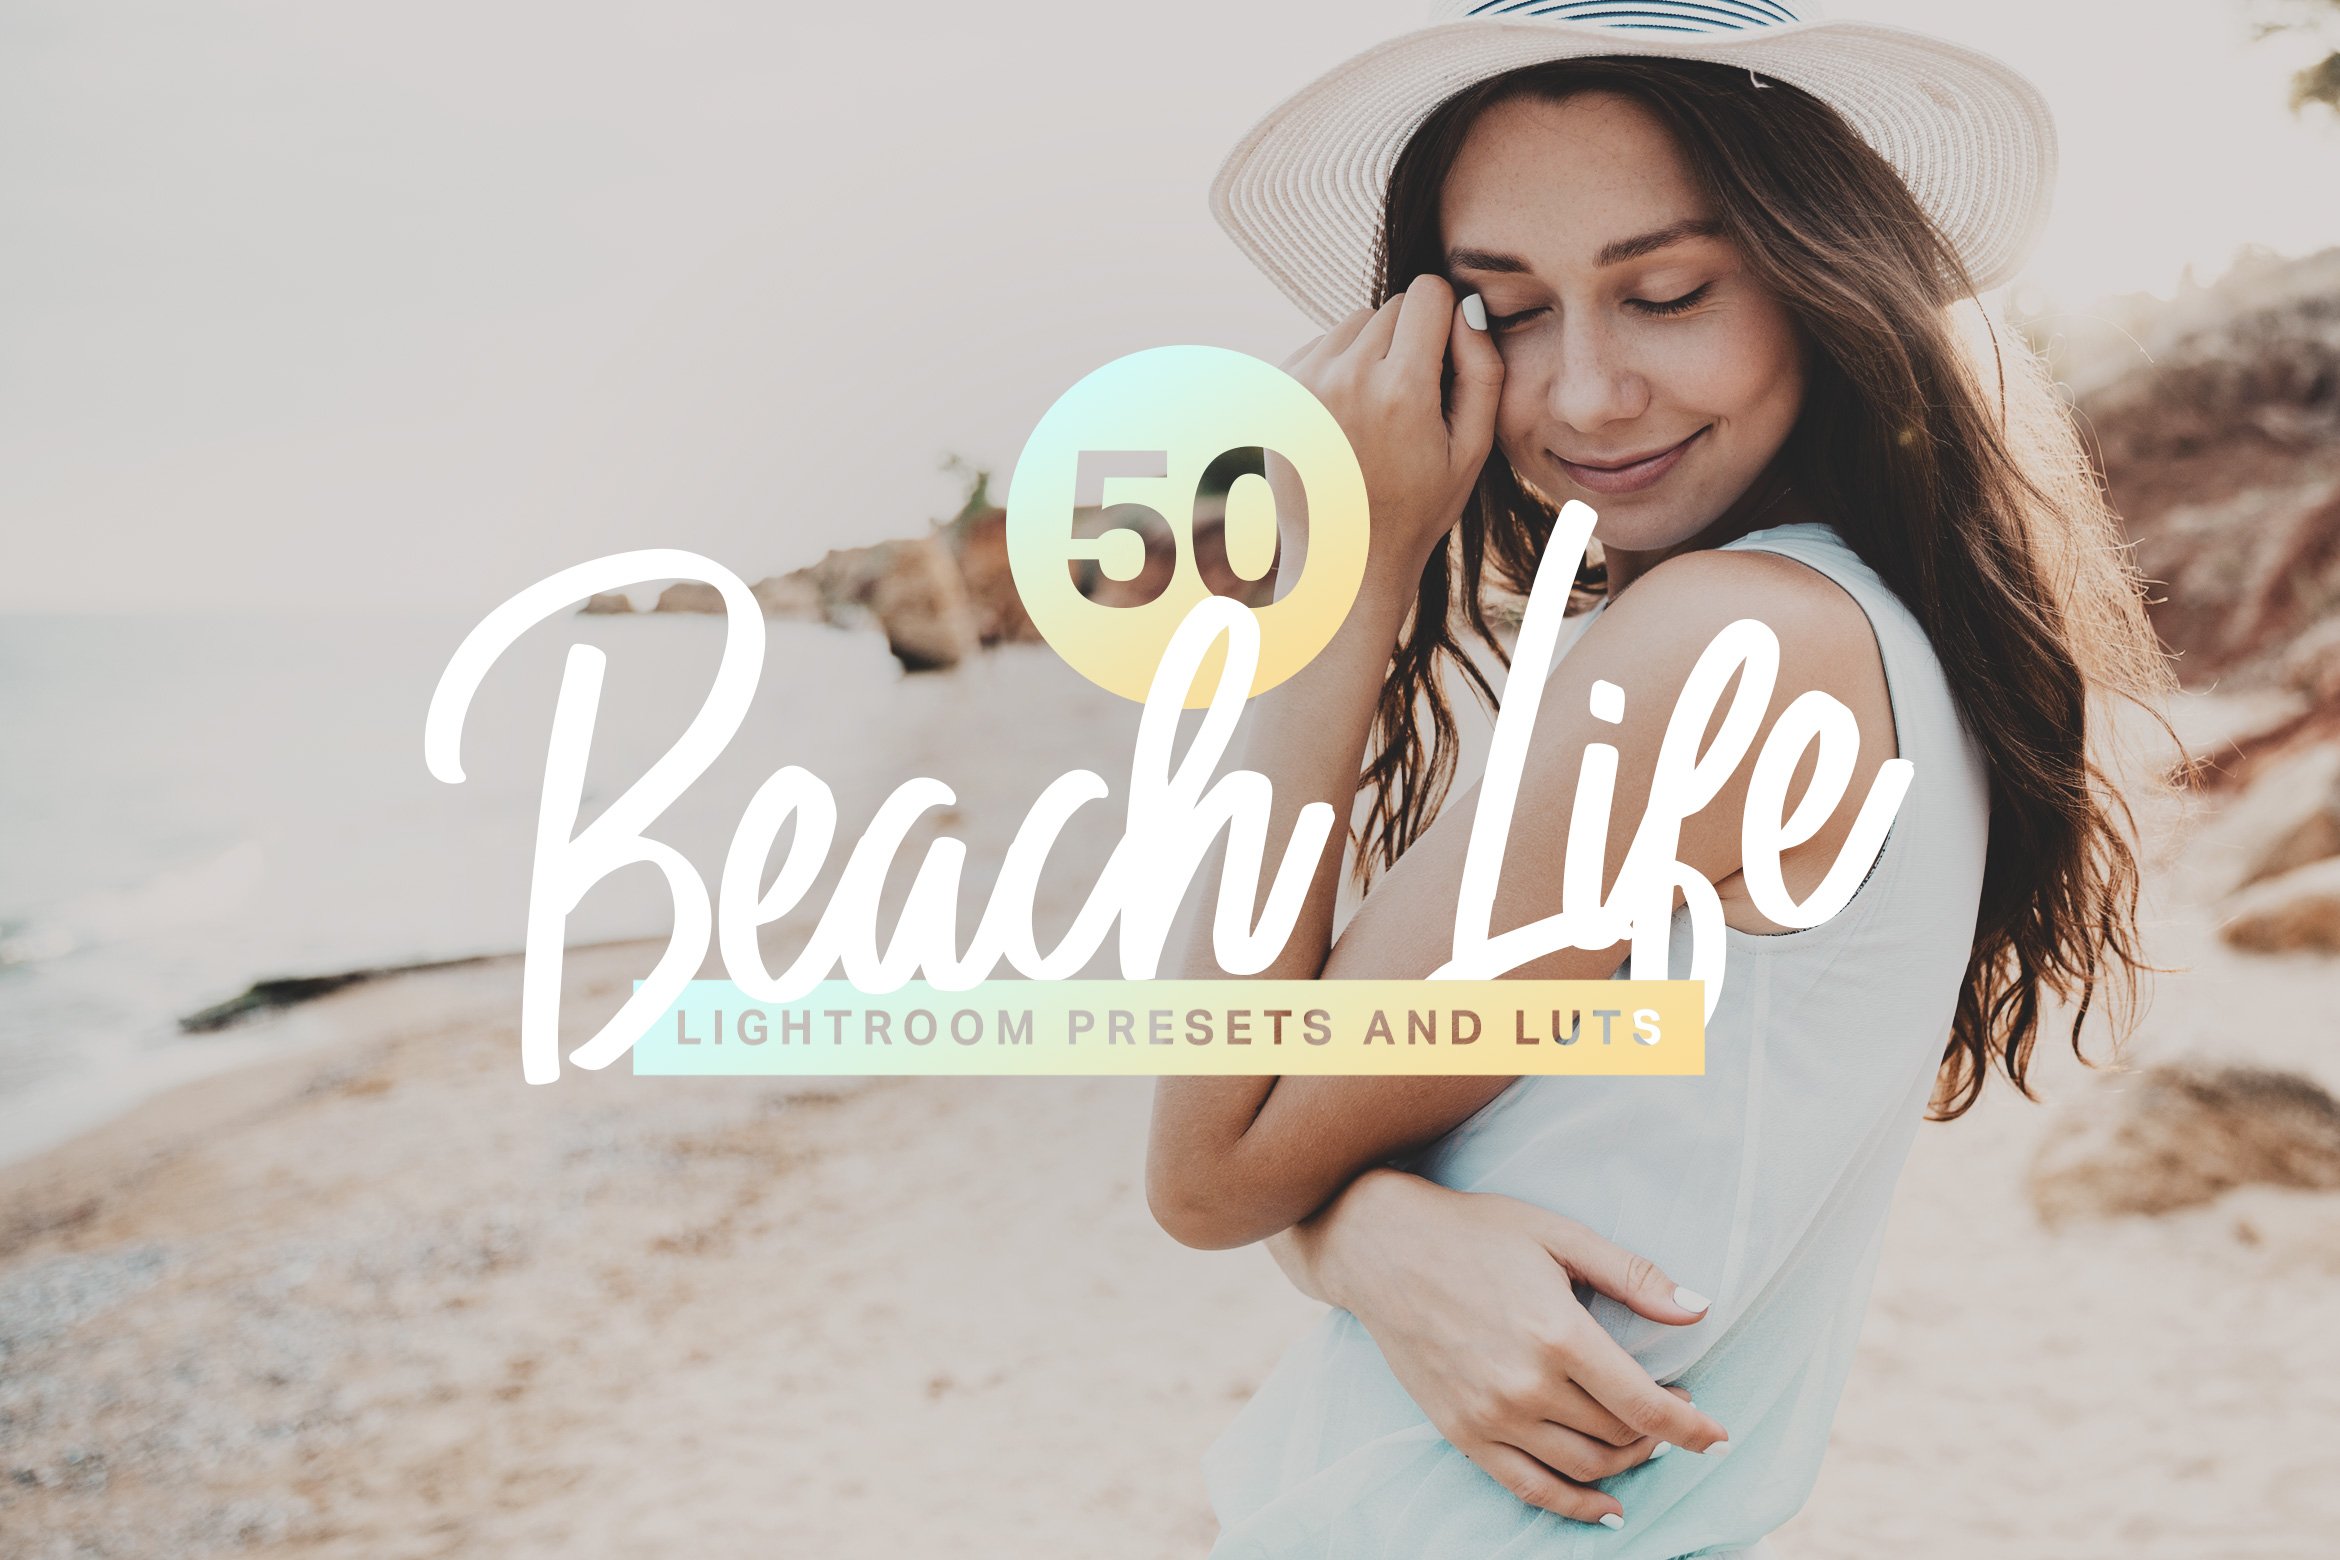 50 Beach Life Lightroom Presets LUTscover image.